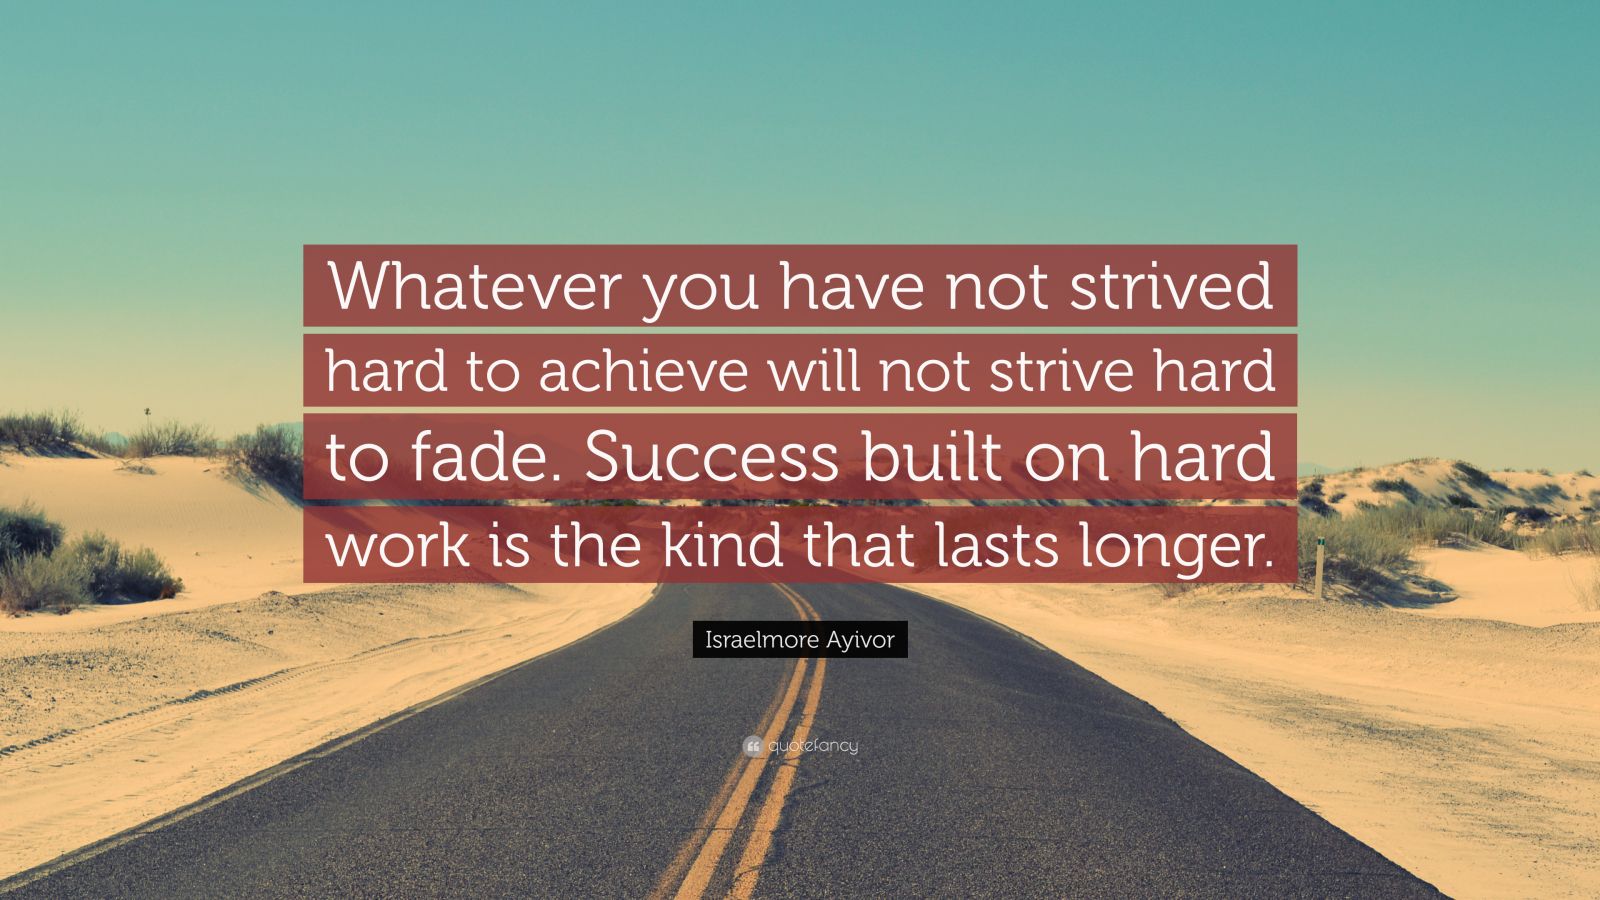 Israelmore Ayivor Quote: “Whatever you have not strived hard to achieve ...